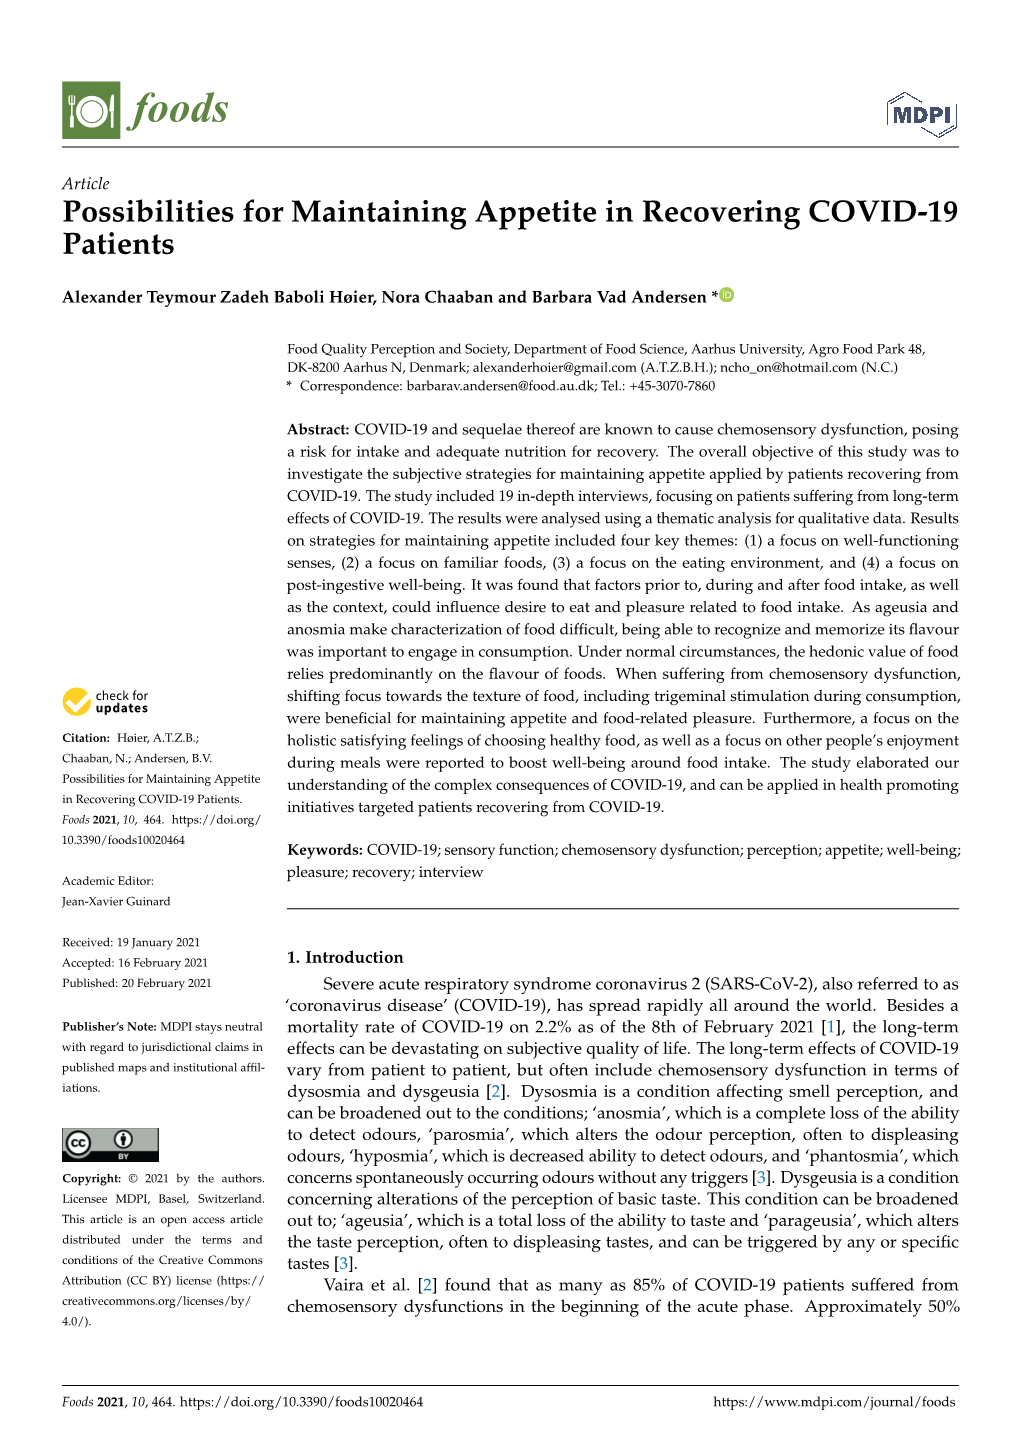 Possibilities for Maintaining Appetite in Recovering COVID-19 Patients